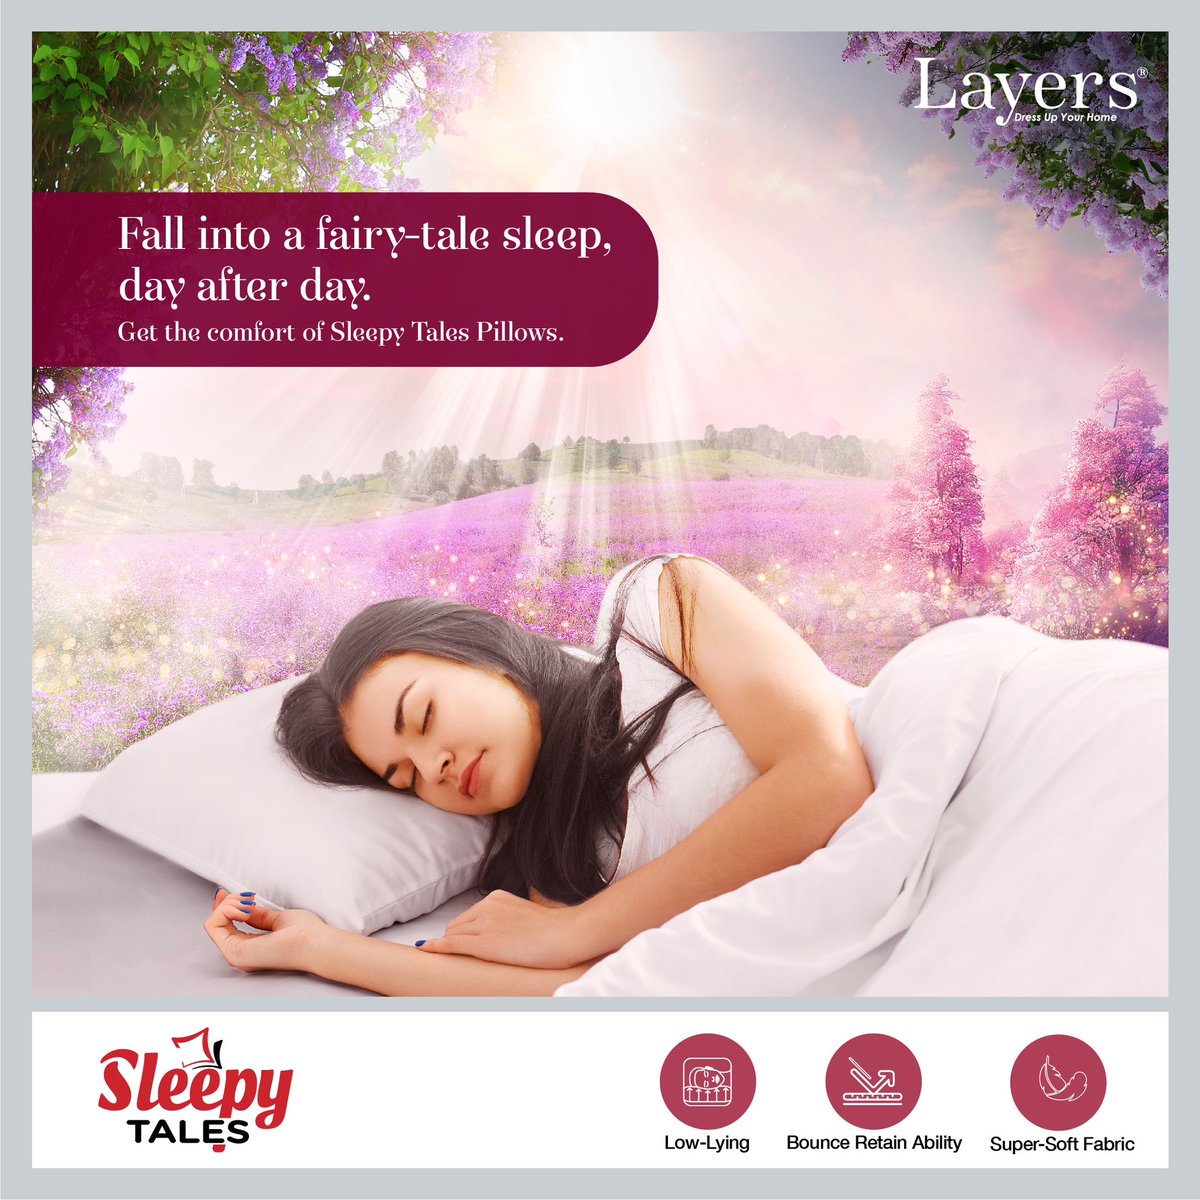 Get yourself easy-wash pillows that keep you stress-free. Try out the Sleepy Tales pillows from Layers, a joy to experience.
#Softpillows #pillowrange #newcollection #SleepyTalesPillows #comfortable #homedecor #Bedsheets #Towels #pillows #comforters #DressUpYourHome #layers